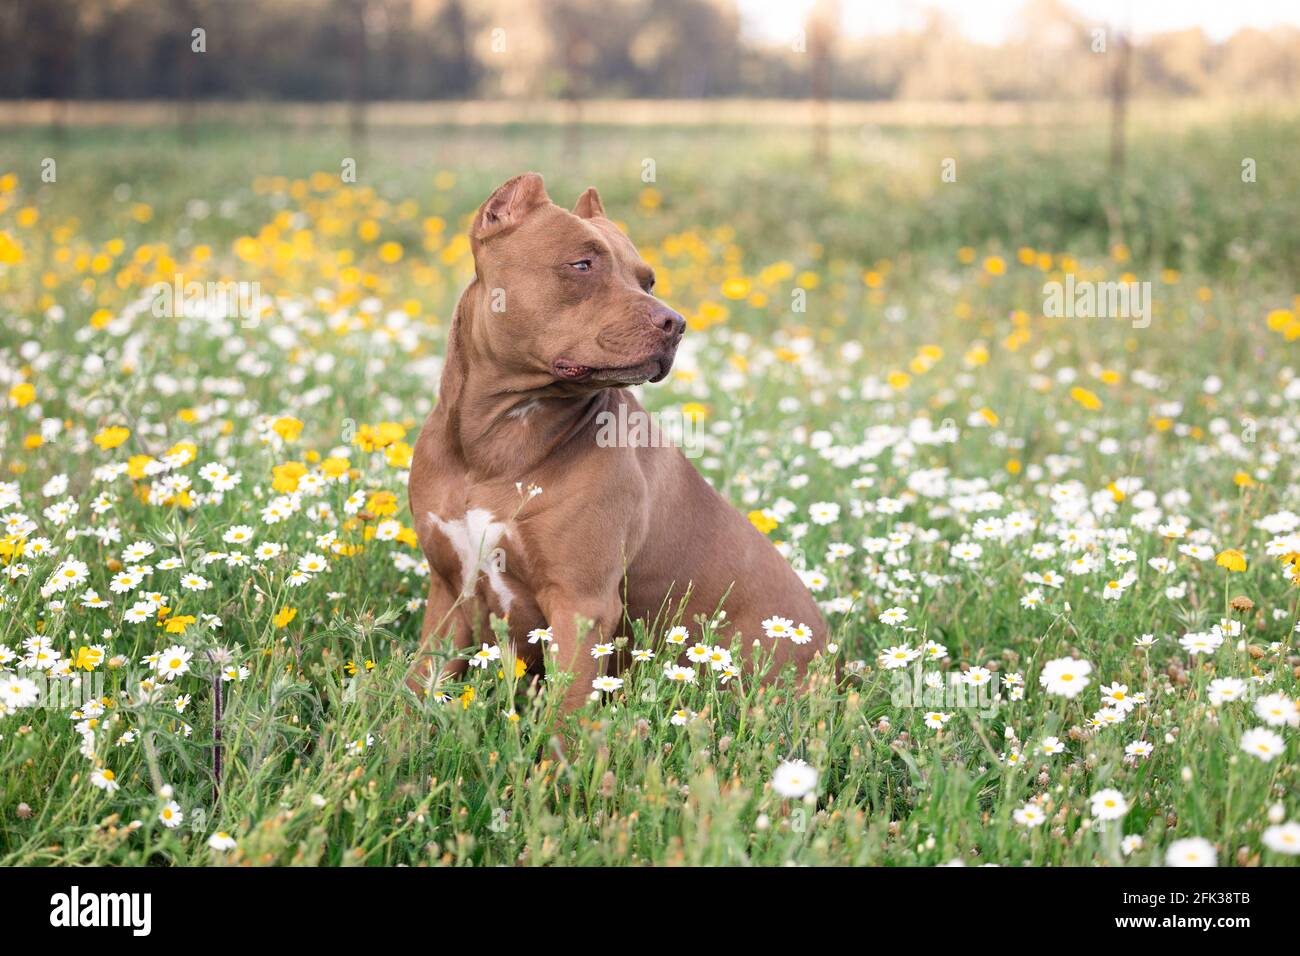 A dog is sitting in a flower field Stock Photo